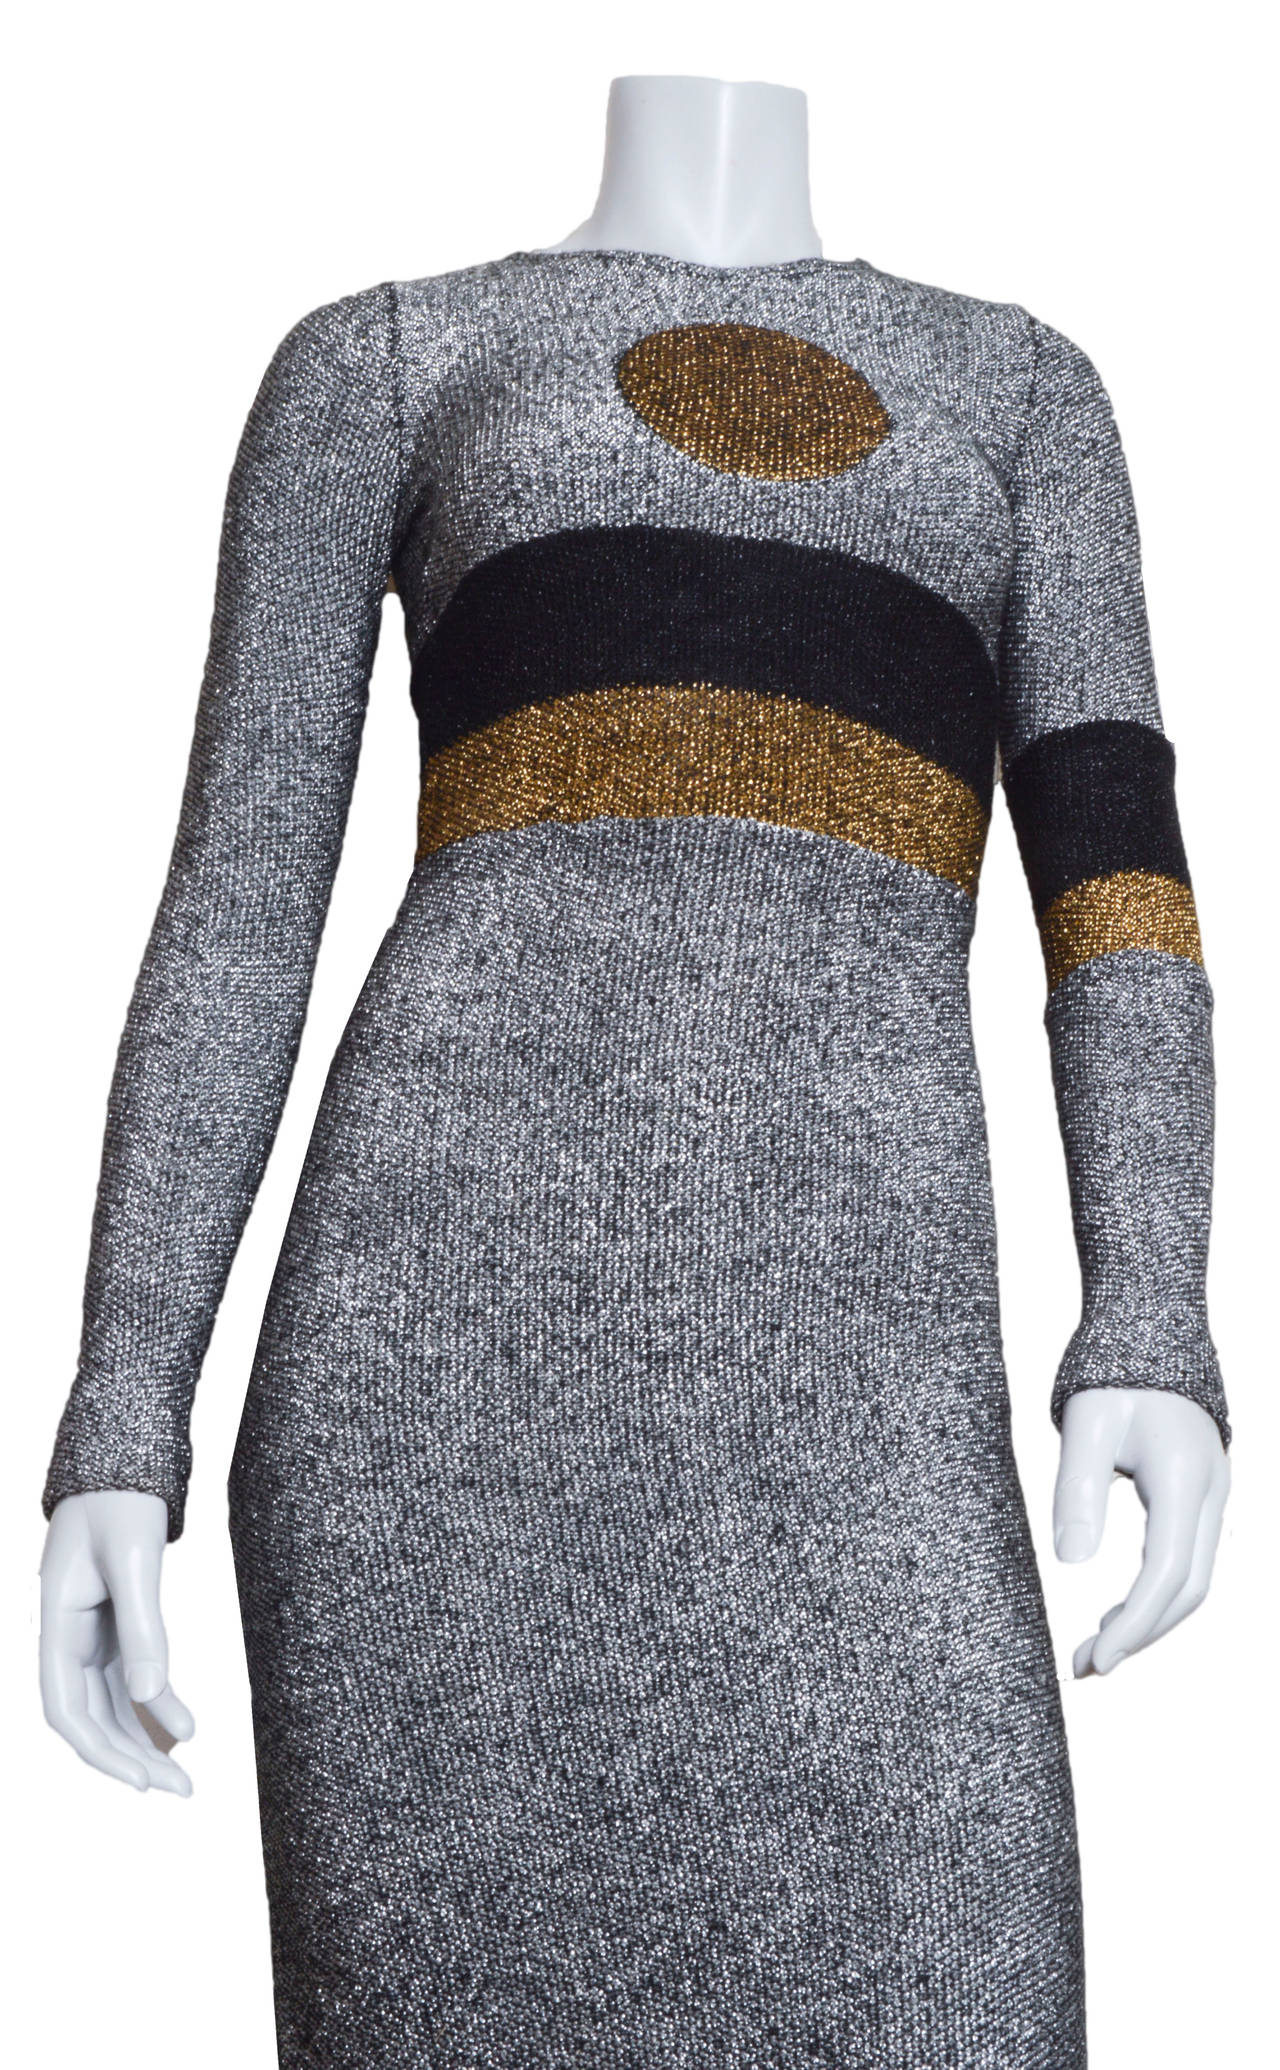 Op Art Rudi Gernreich for Harmon Knitwear gown.
Form fitting, stretchy silhouette.
Silver metallic thread with gold dot on chest.
Waist cinching black and gold stripes with matching armband.
Back zipper.
Unlined.
Tagged a size 8.